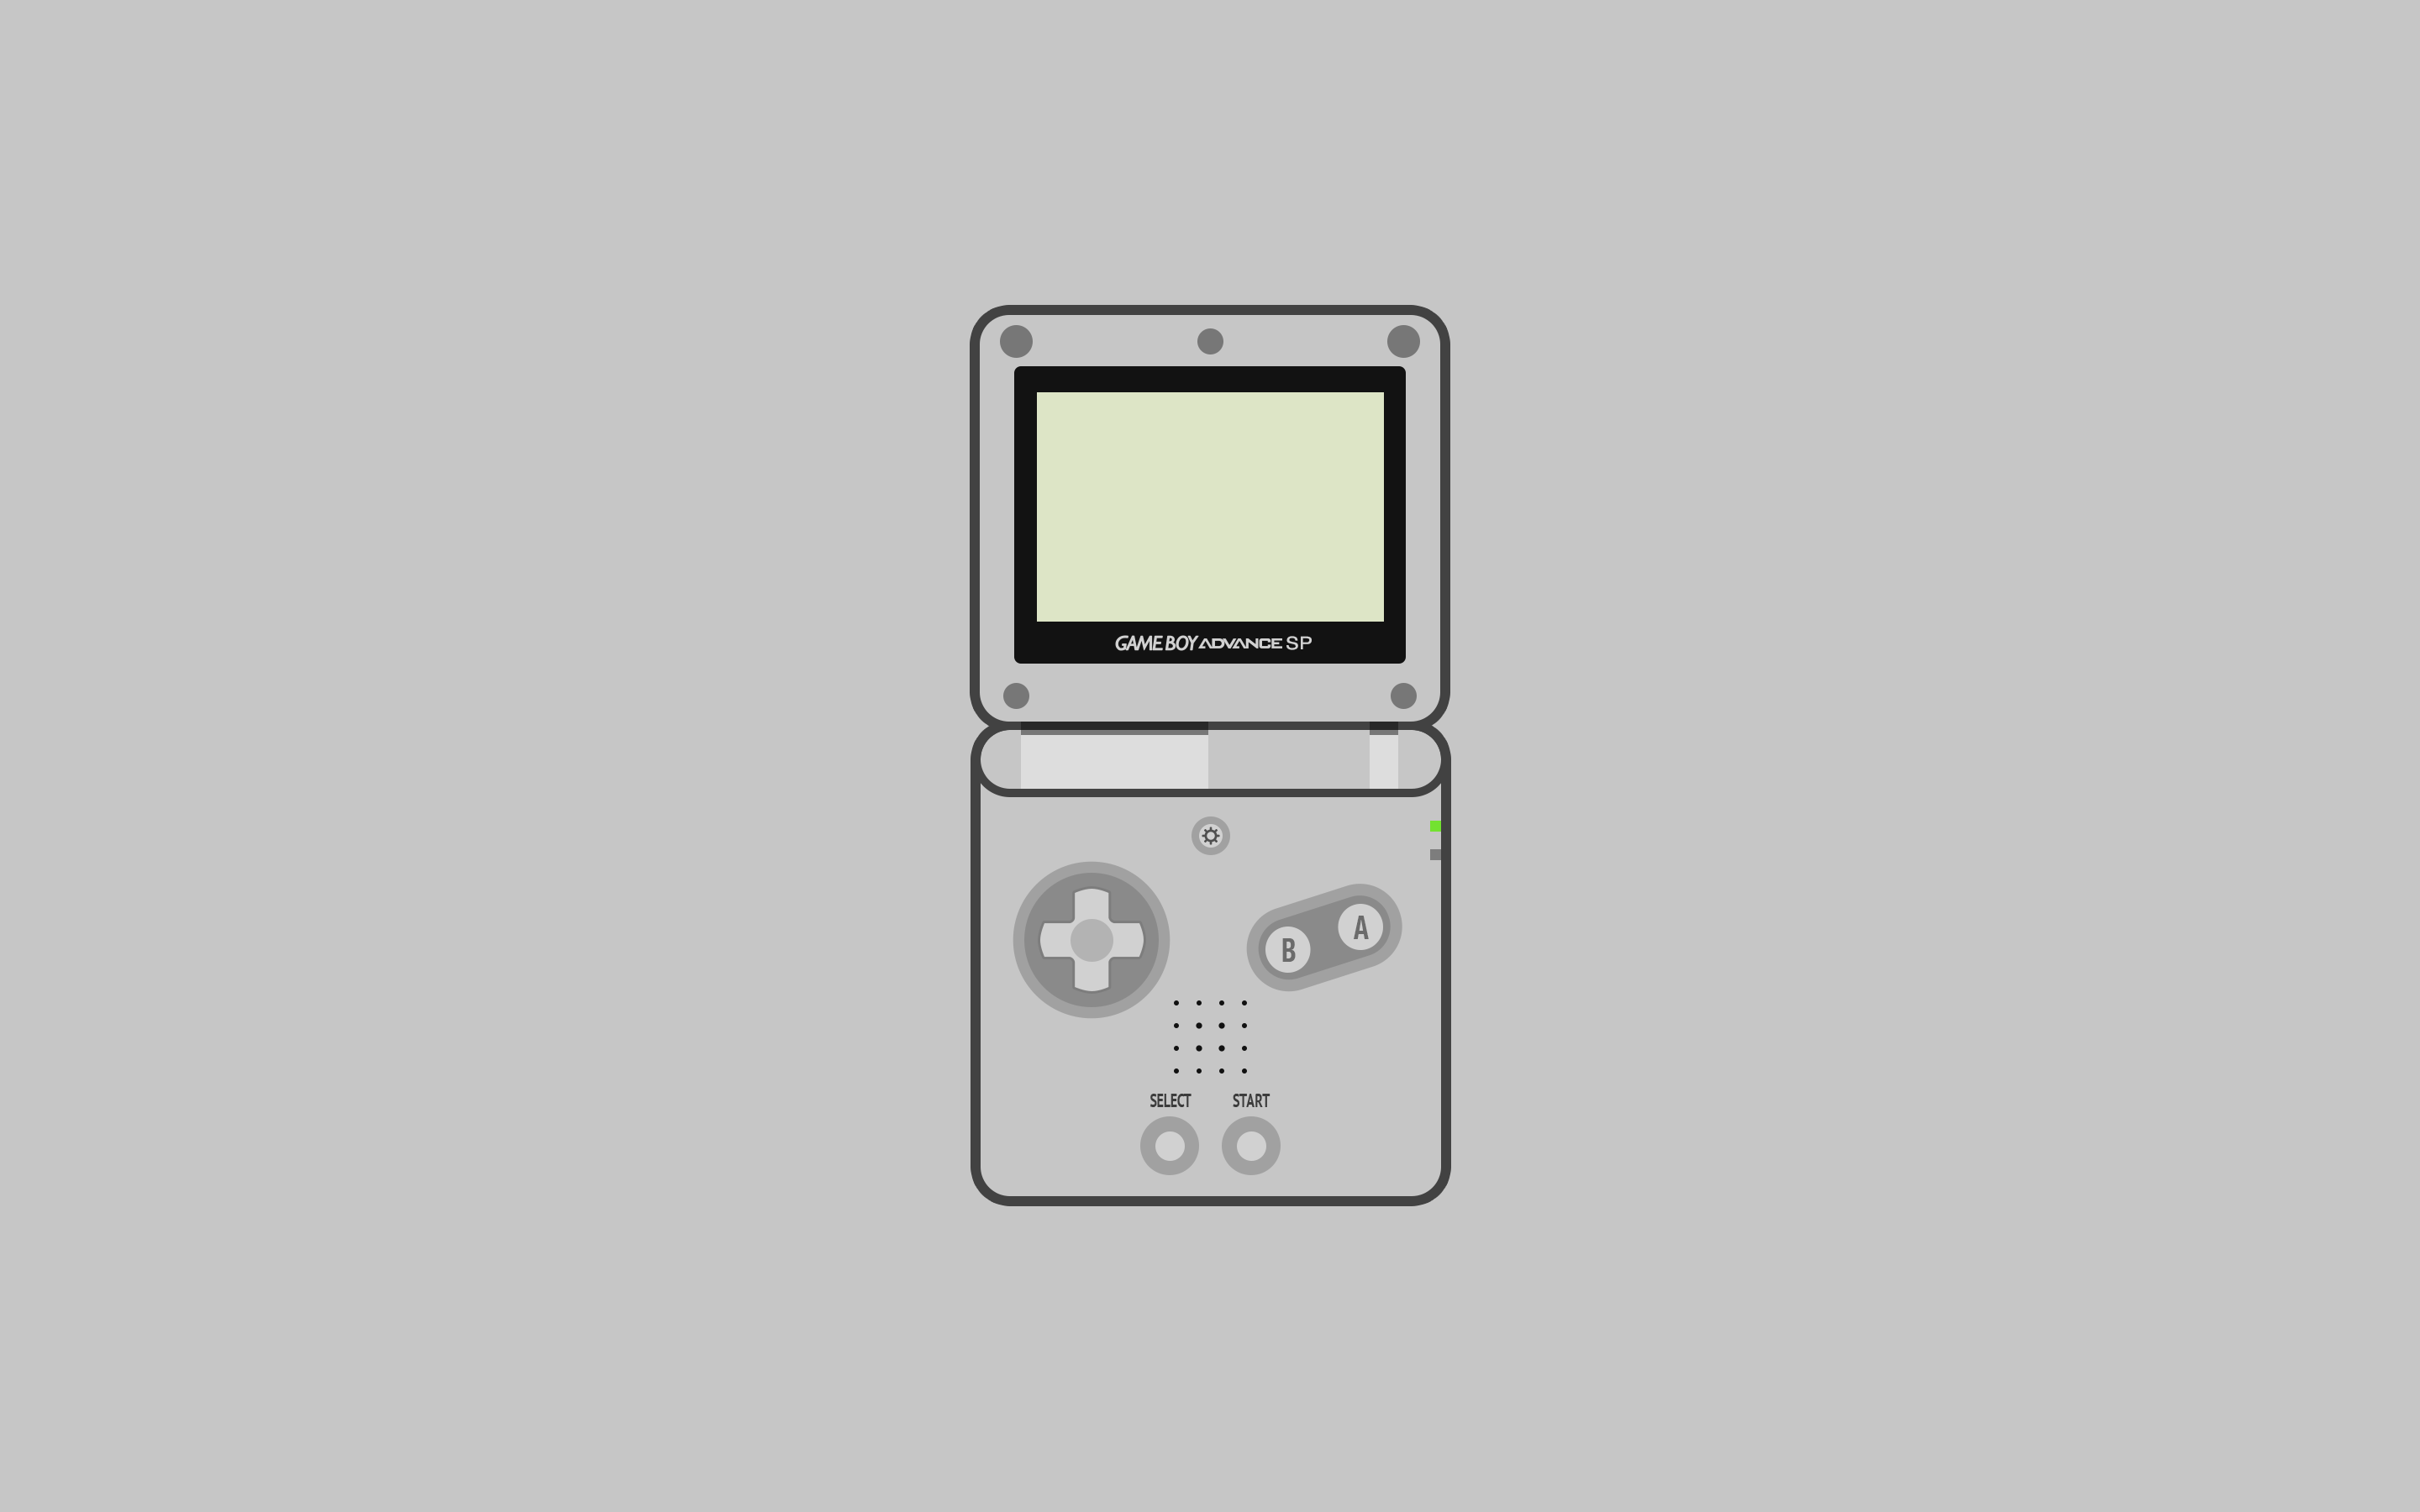 Gameboy Wallpapers Top Free Gameboy Backgrounds Wallpaperaccess Images, Photos, Reviews